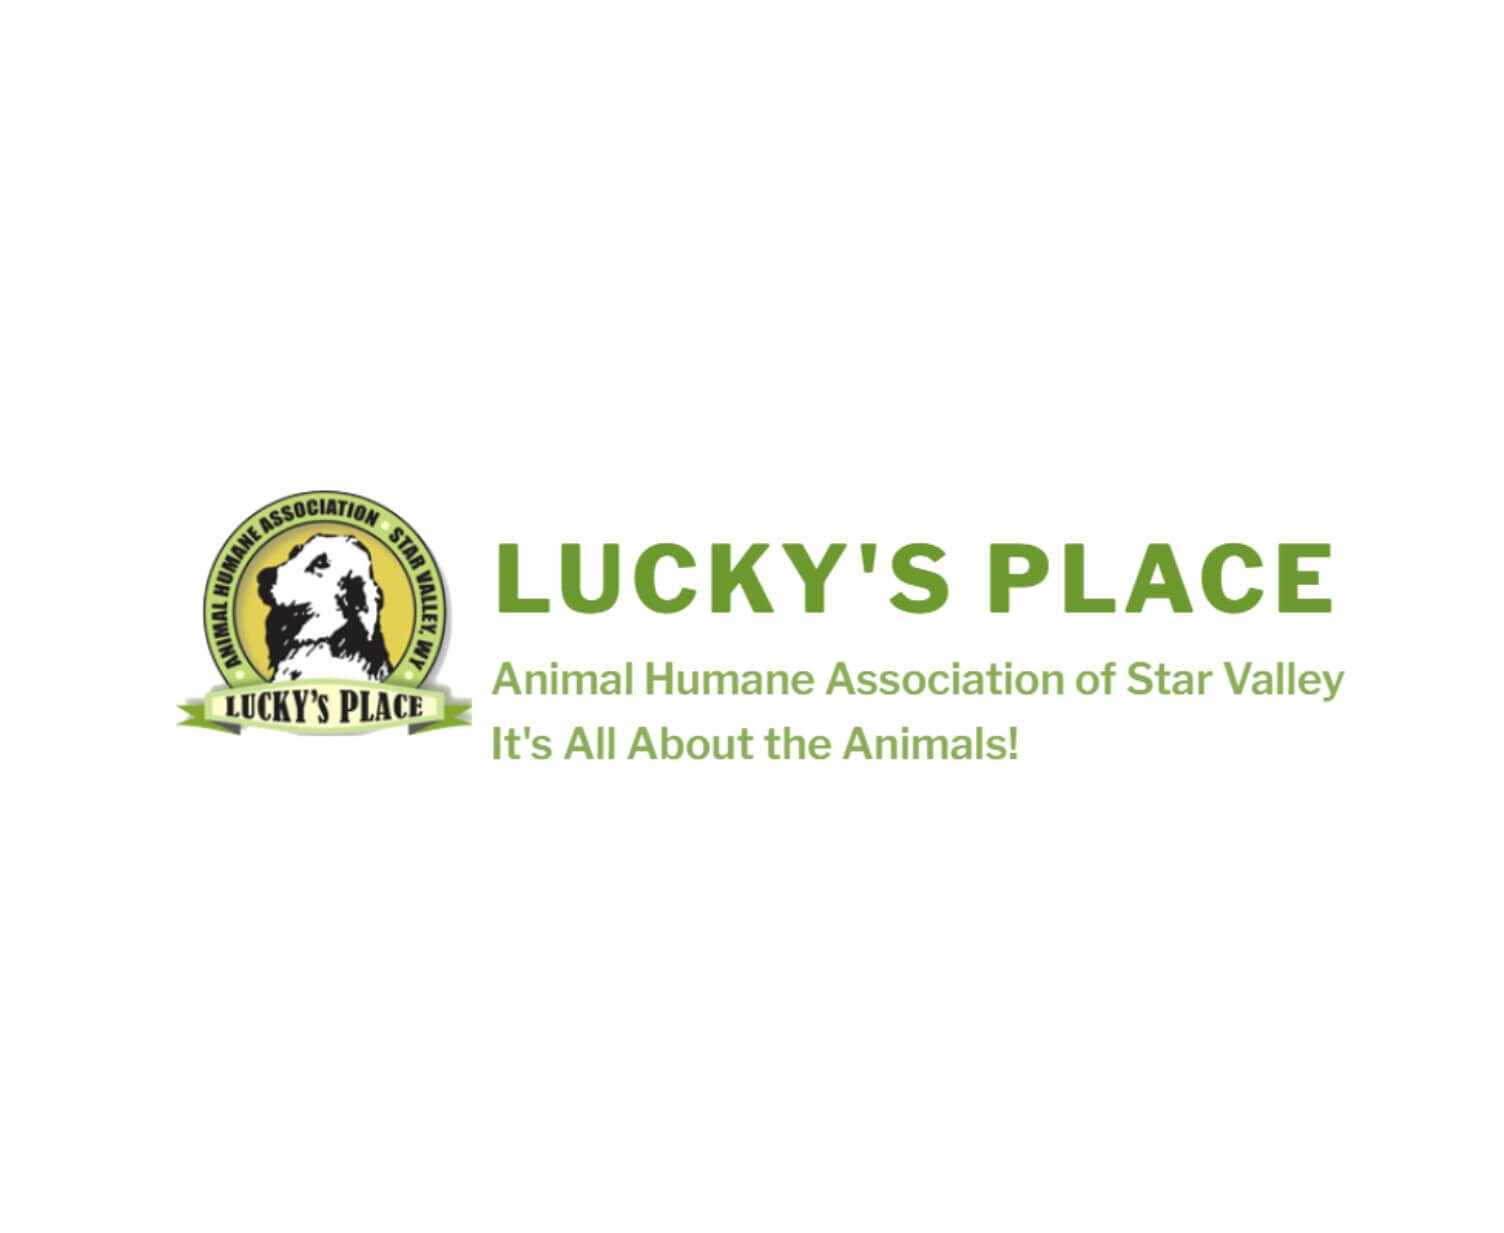 luckys place